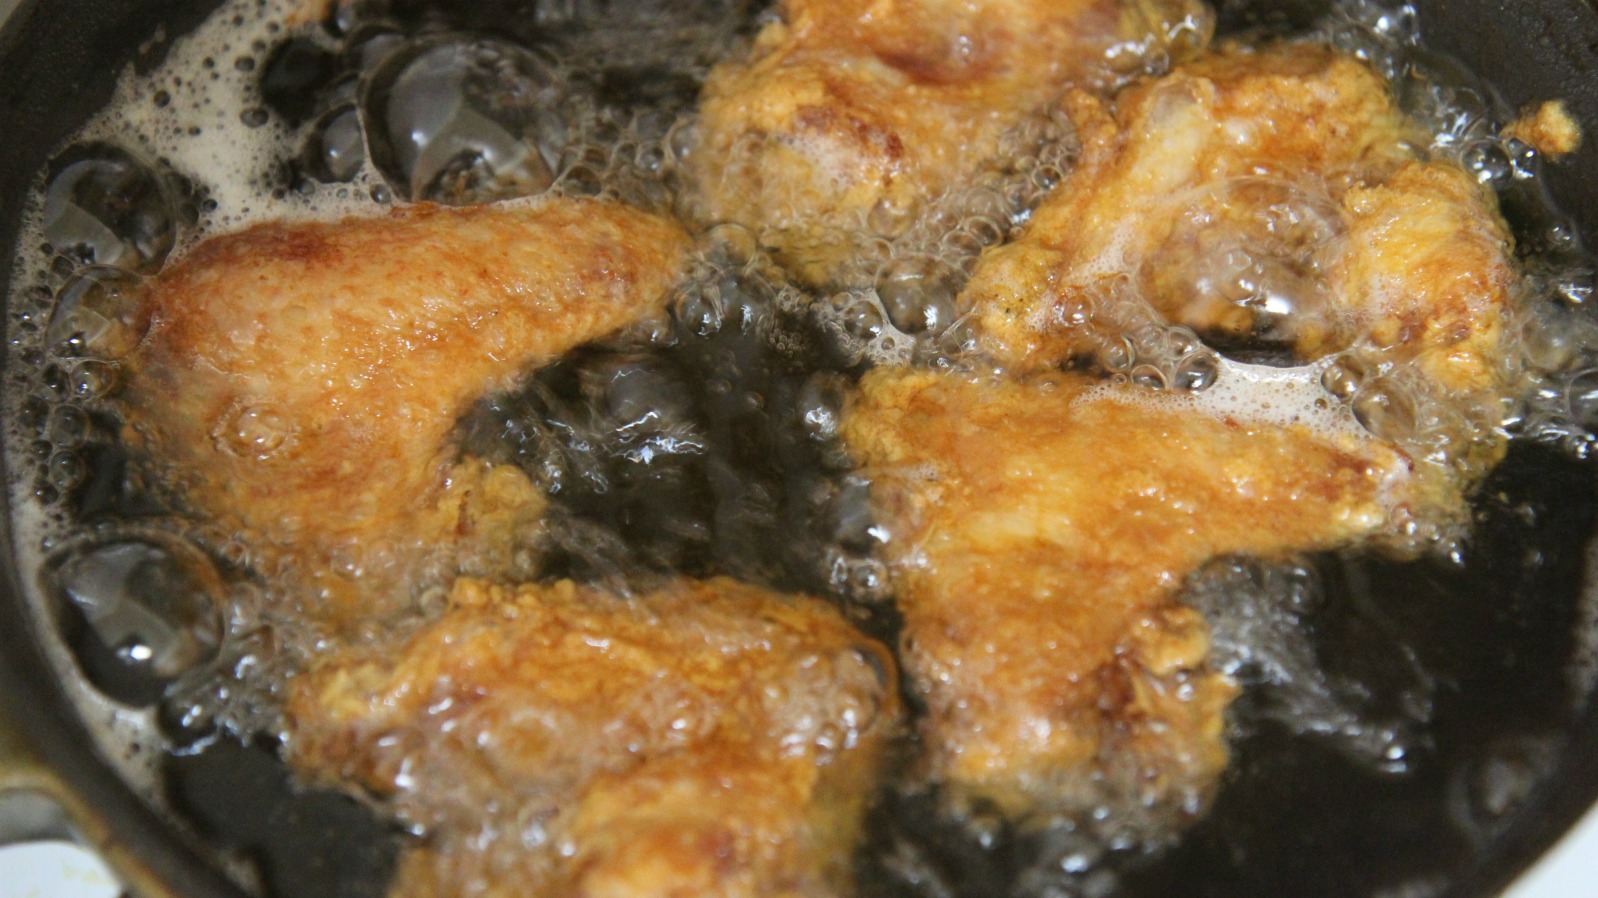 Make sure you pat the chicken wings dry before deep frying to prevent splatter.